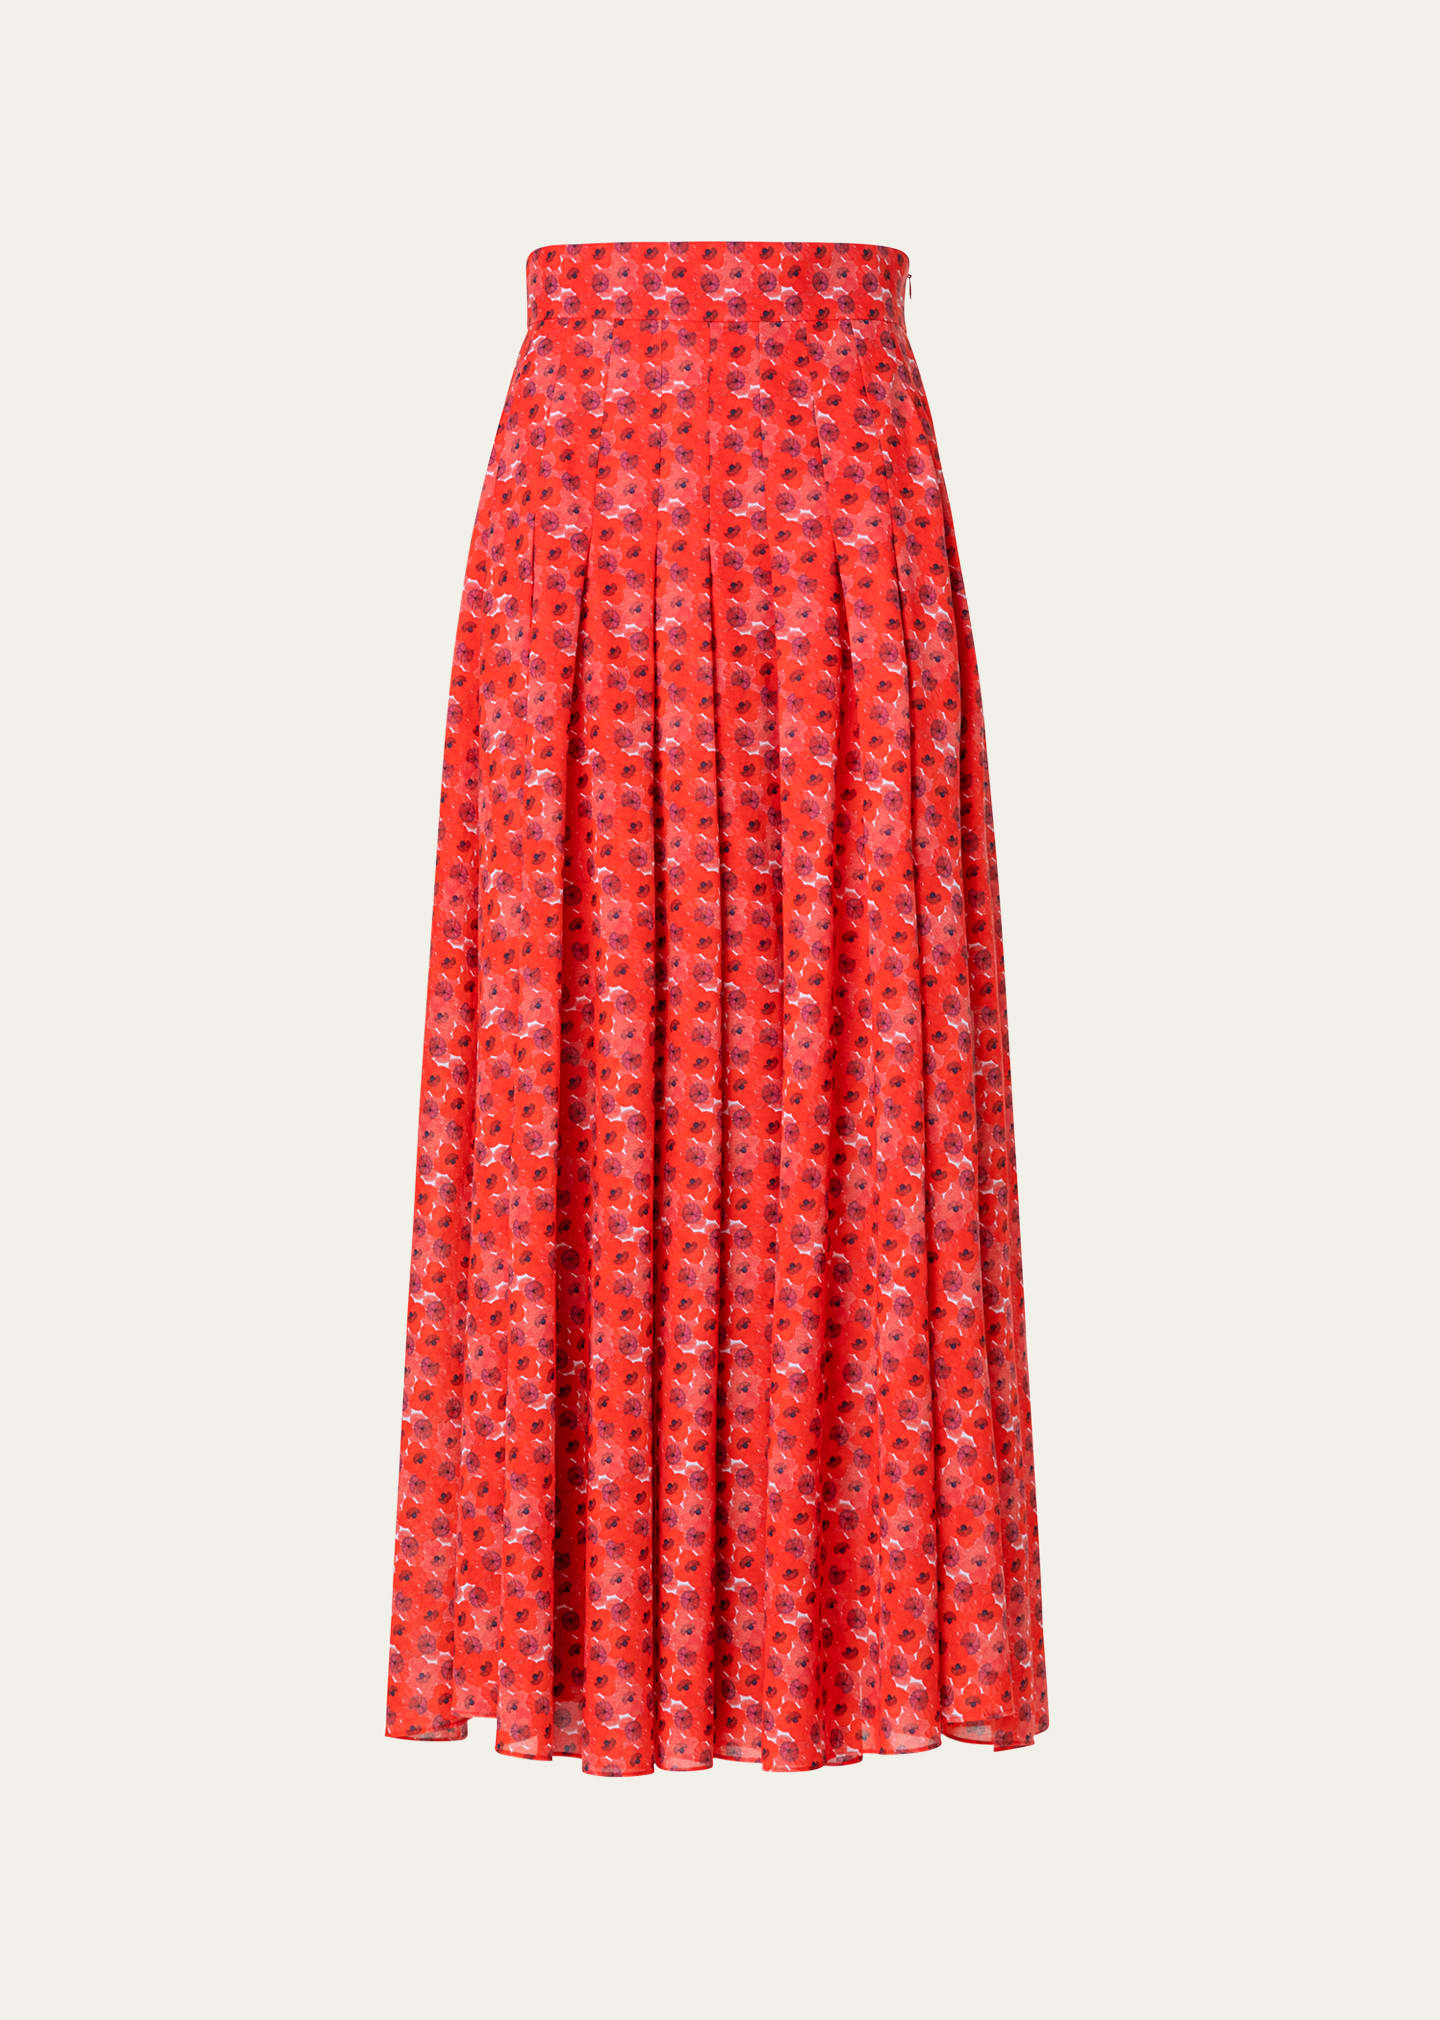 Akris Pleated Floral-print Cotton Voile Maxi Skirt In Poppy